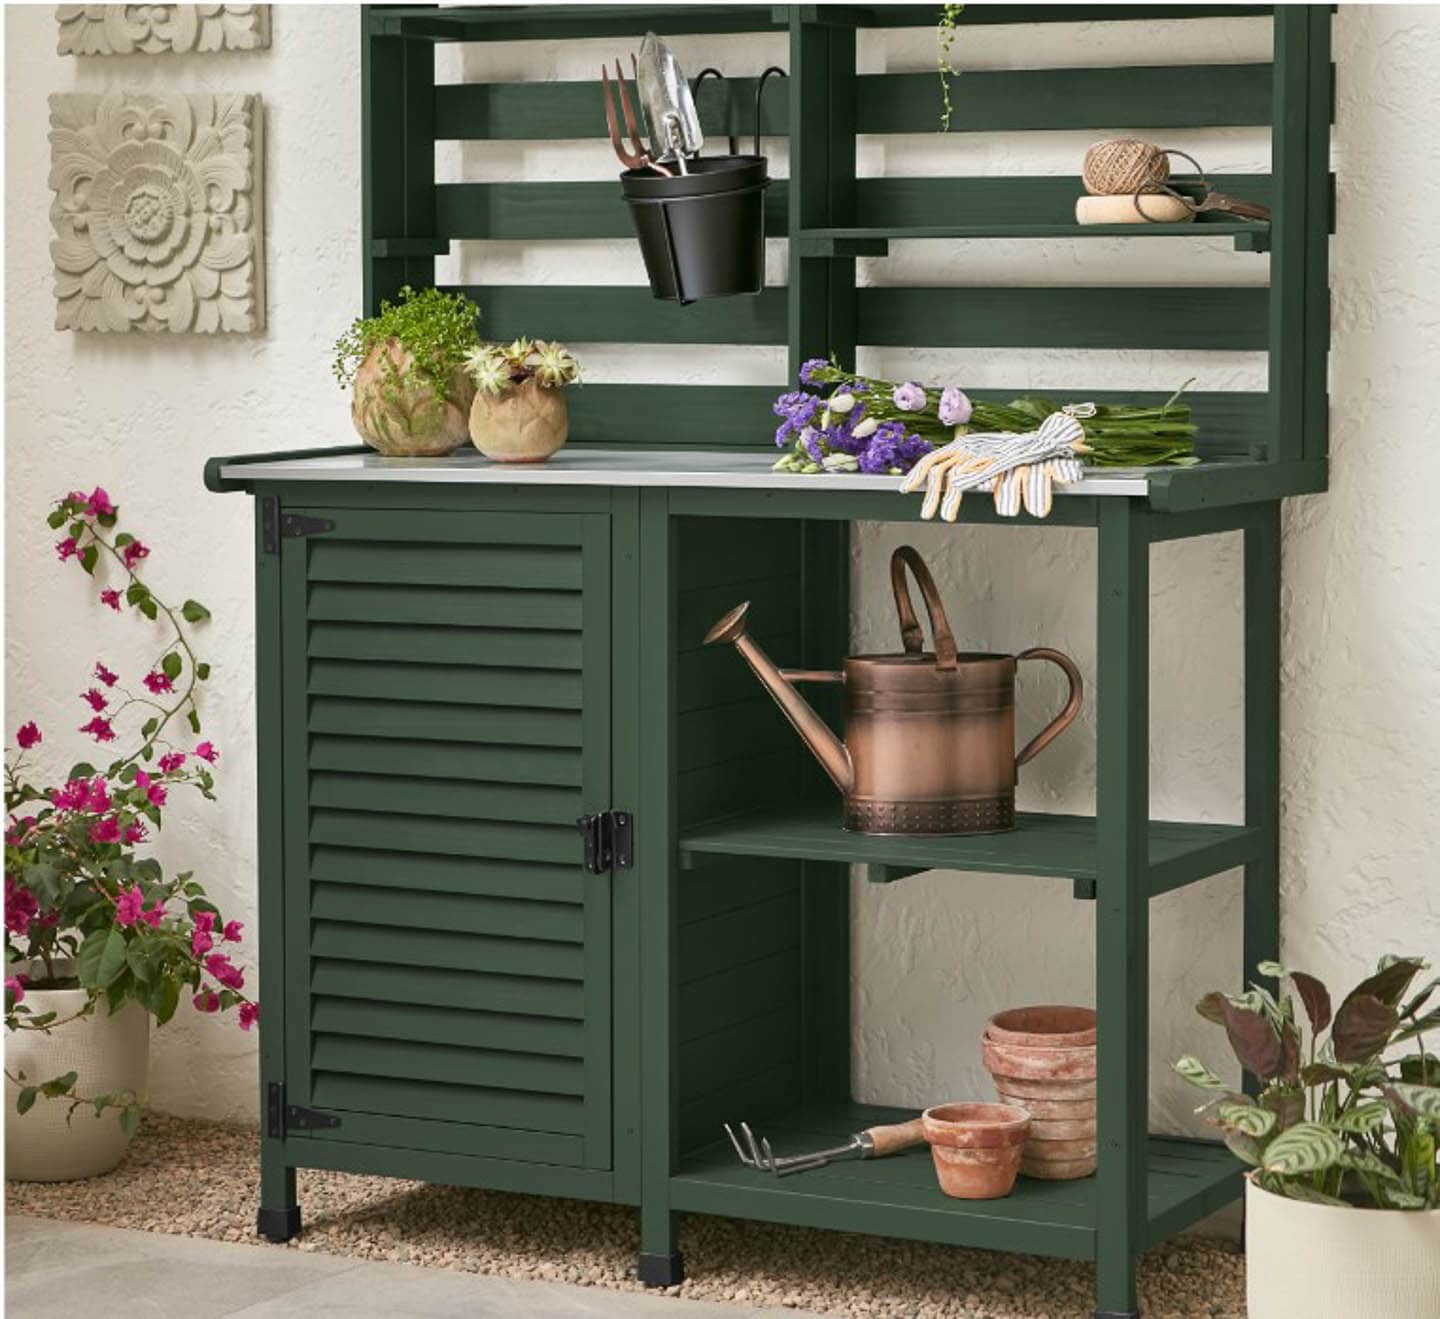 A garden bench painted in Krylon's 2023 color of the year - Spanish Moss